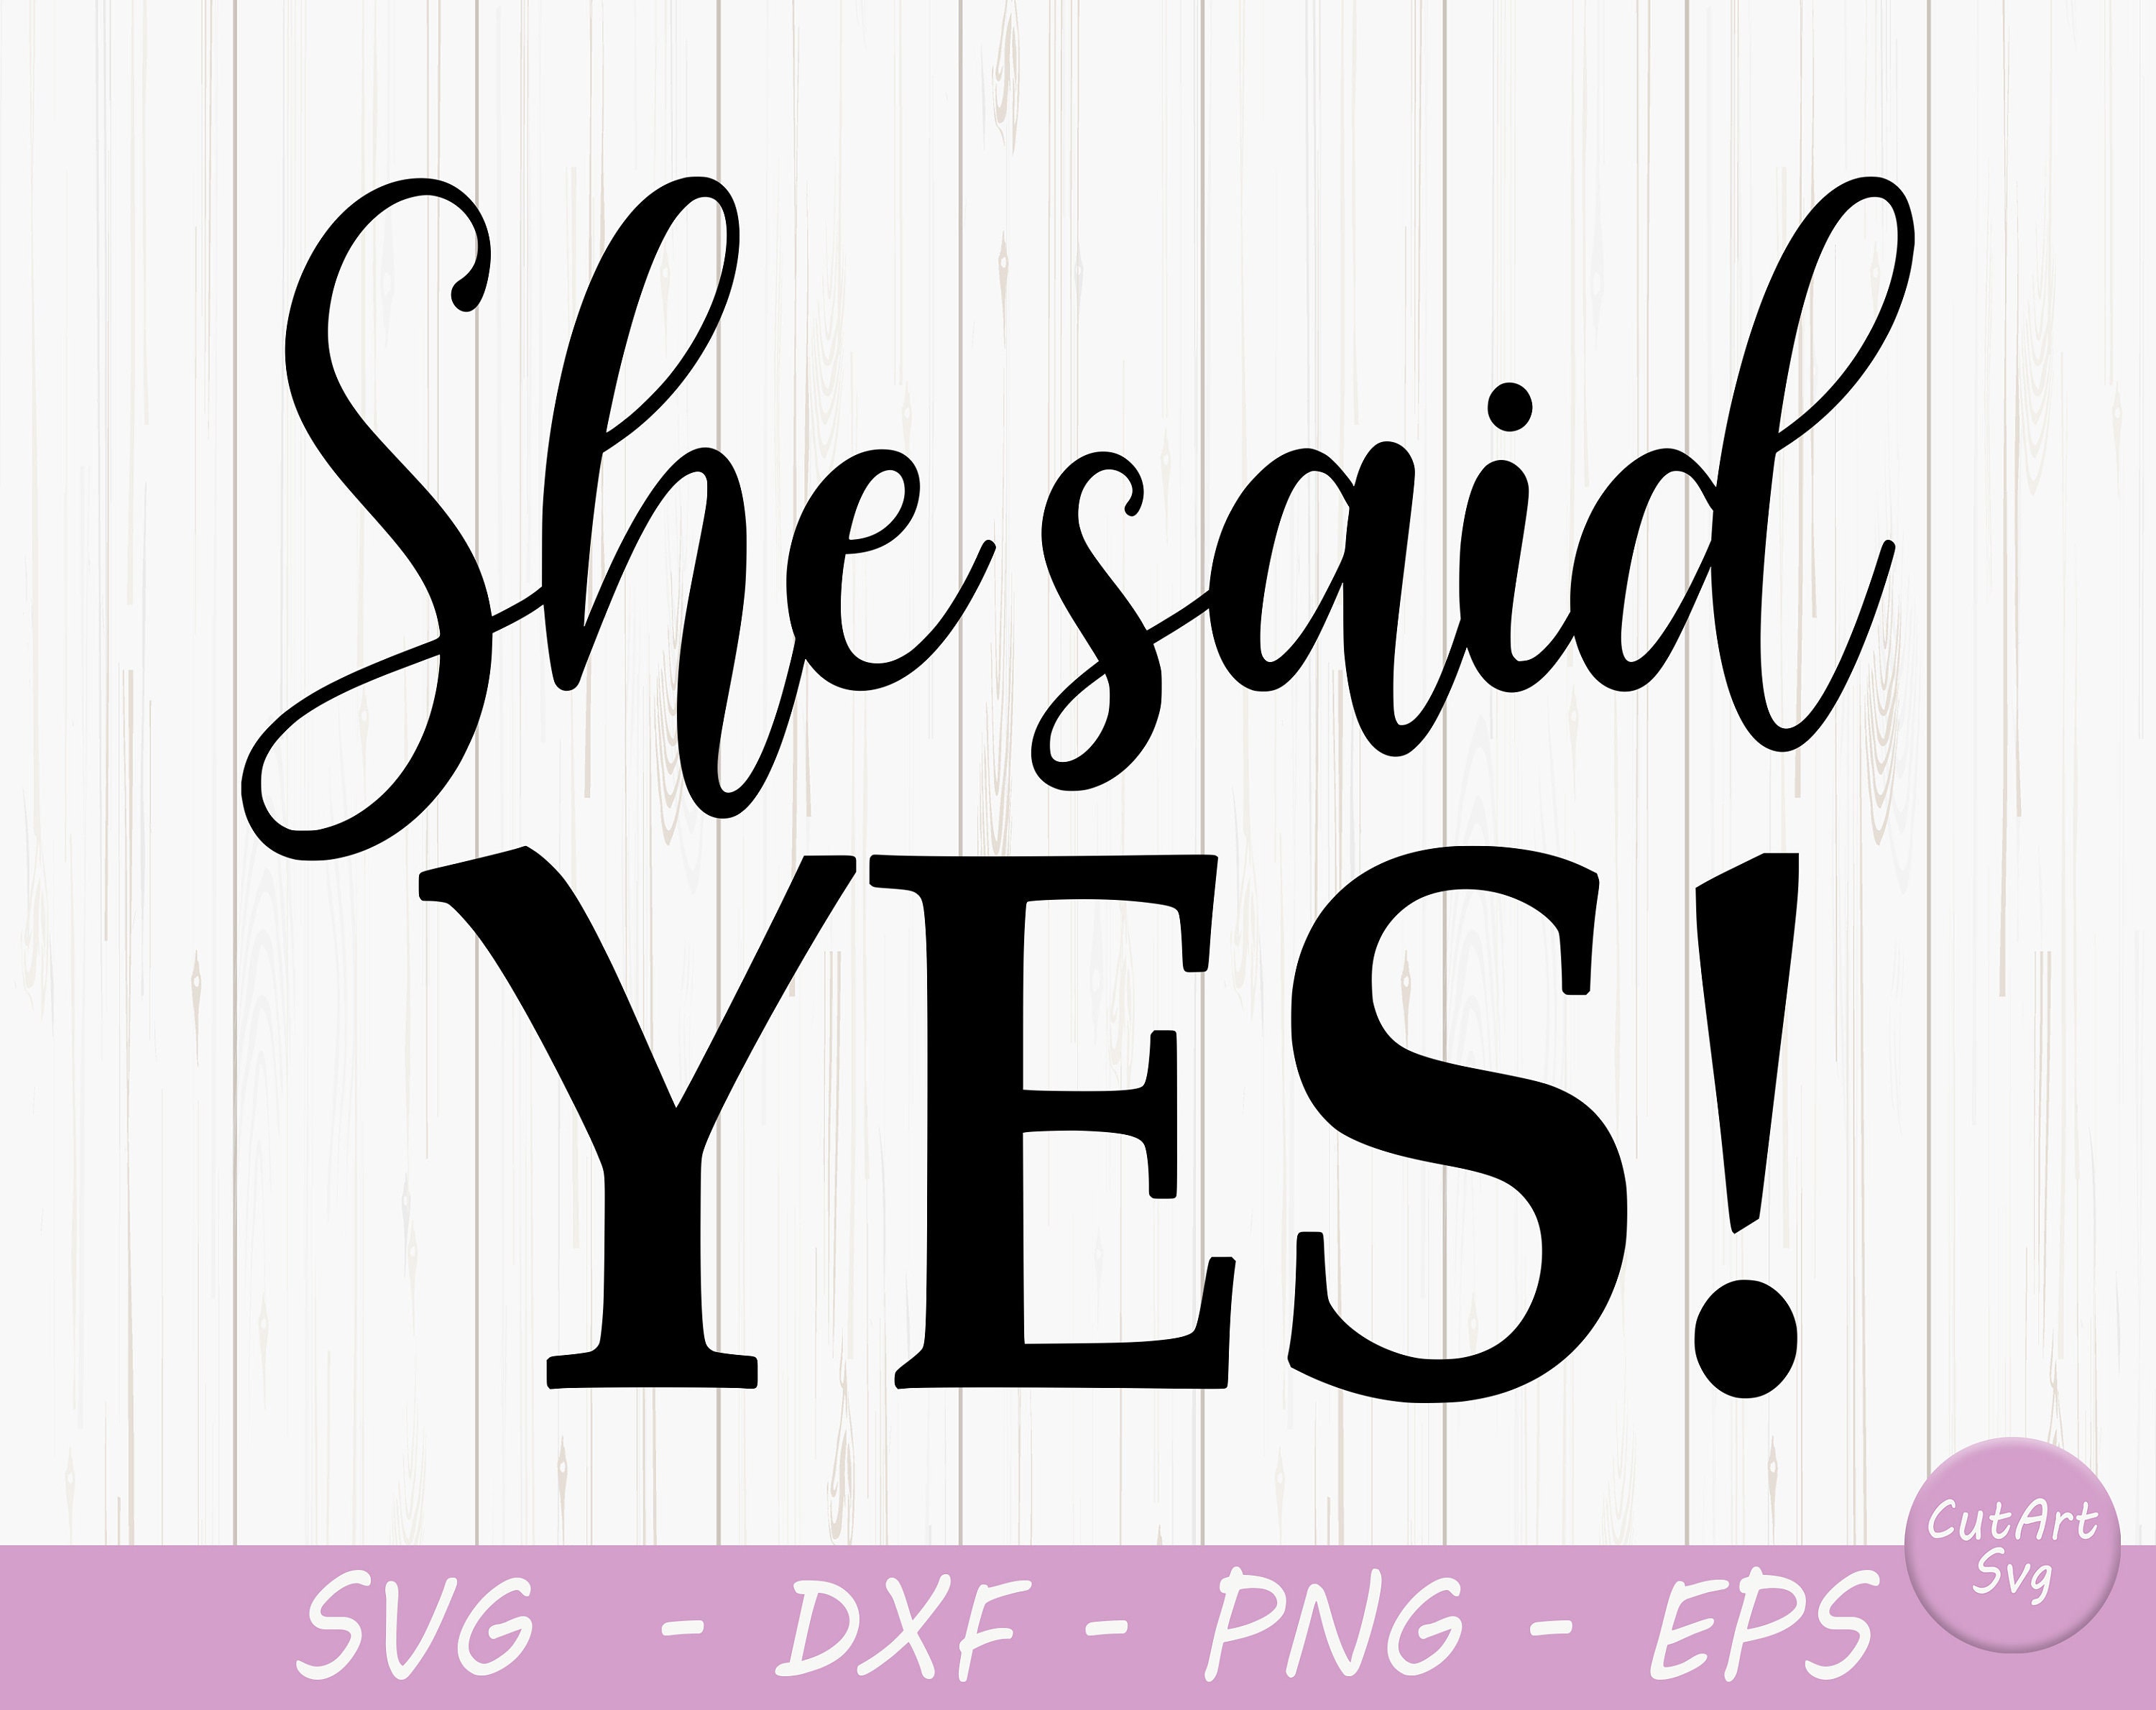 She Said Yes SVG Engaged svg dxf png instant download | Etsy